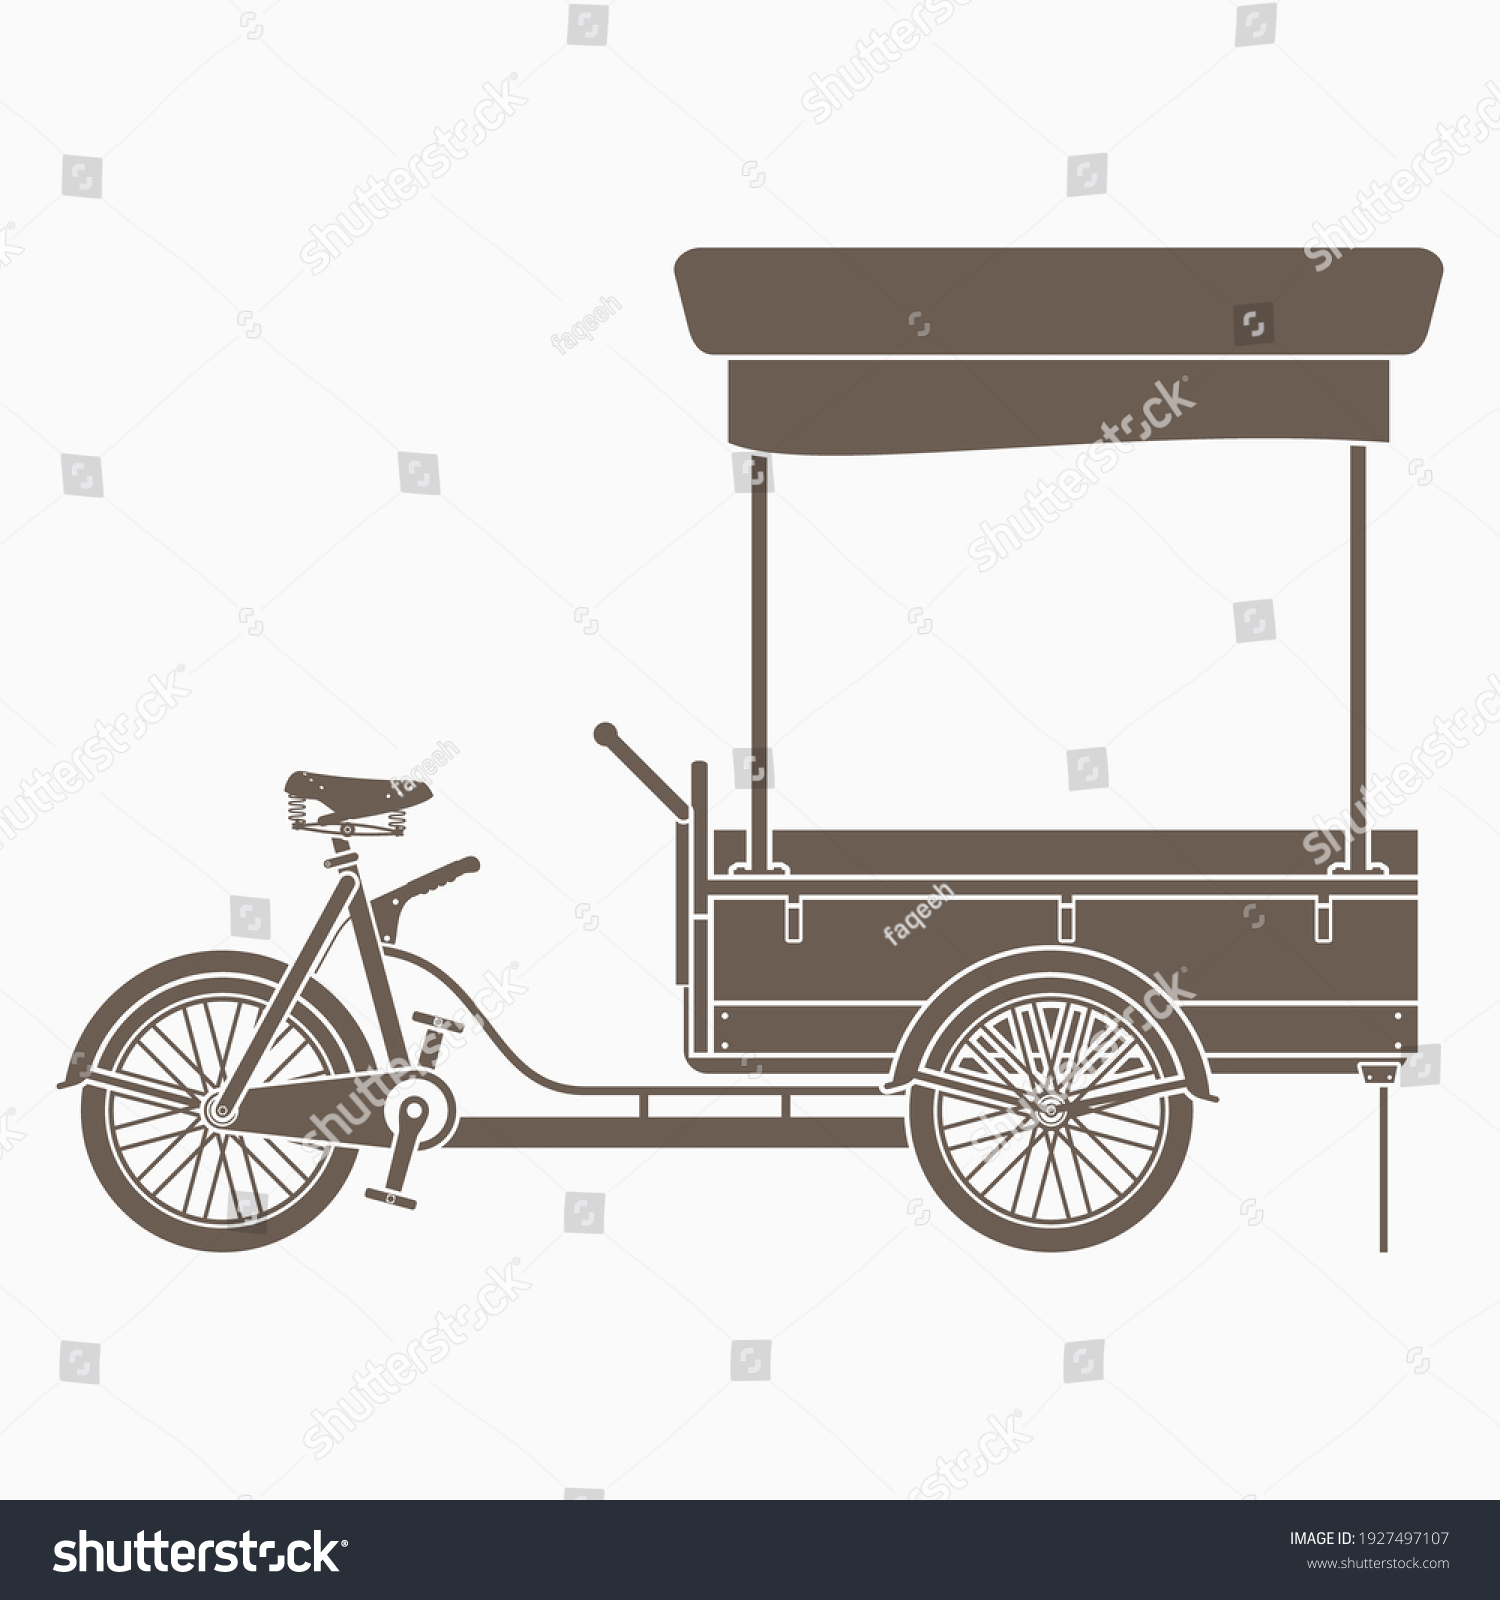 SVG of Editable Isolated Side View Mobile Food Bike Shop Vector Illustration in Flat Monochrome Style for Artwork Element of Vehicle or Food and Drink Business Related Design svg